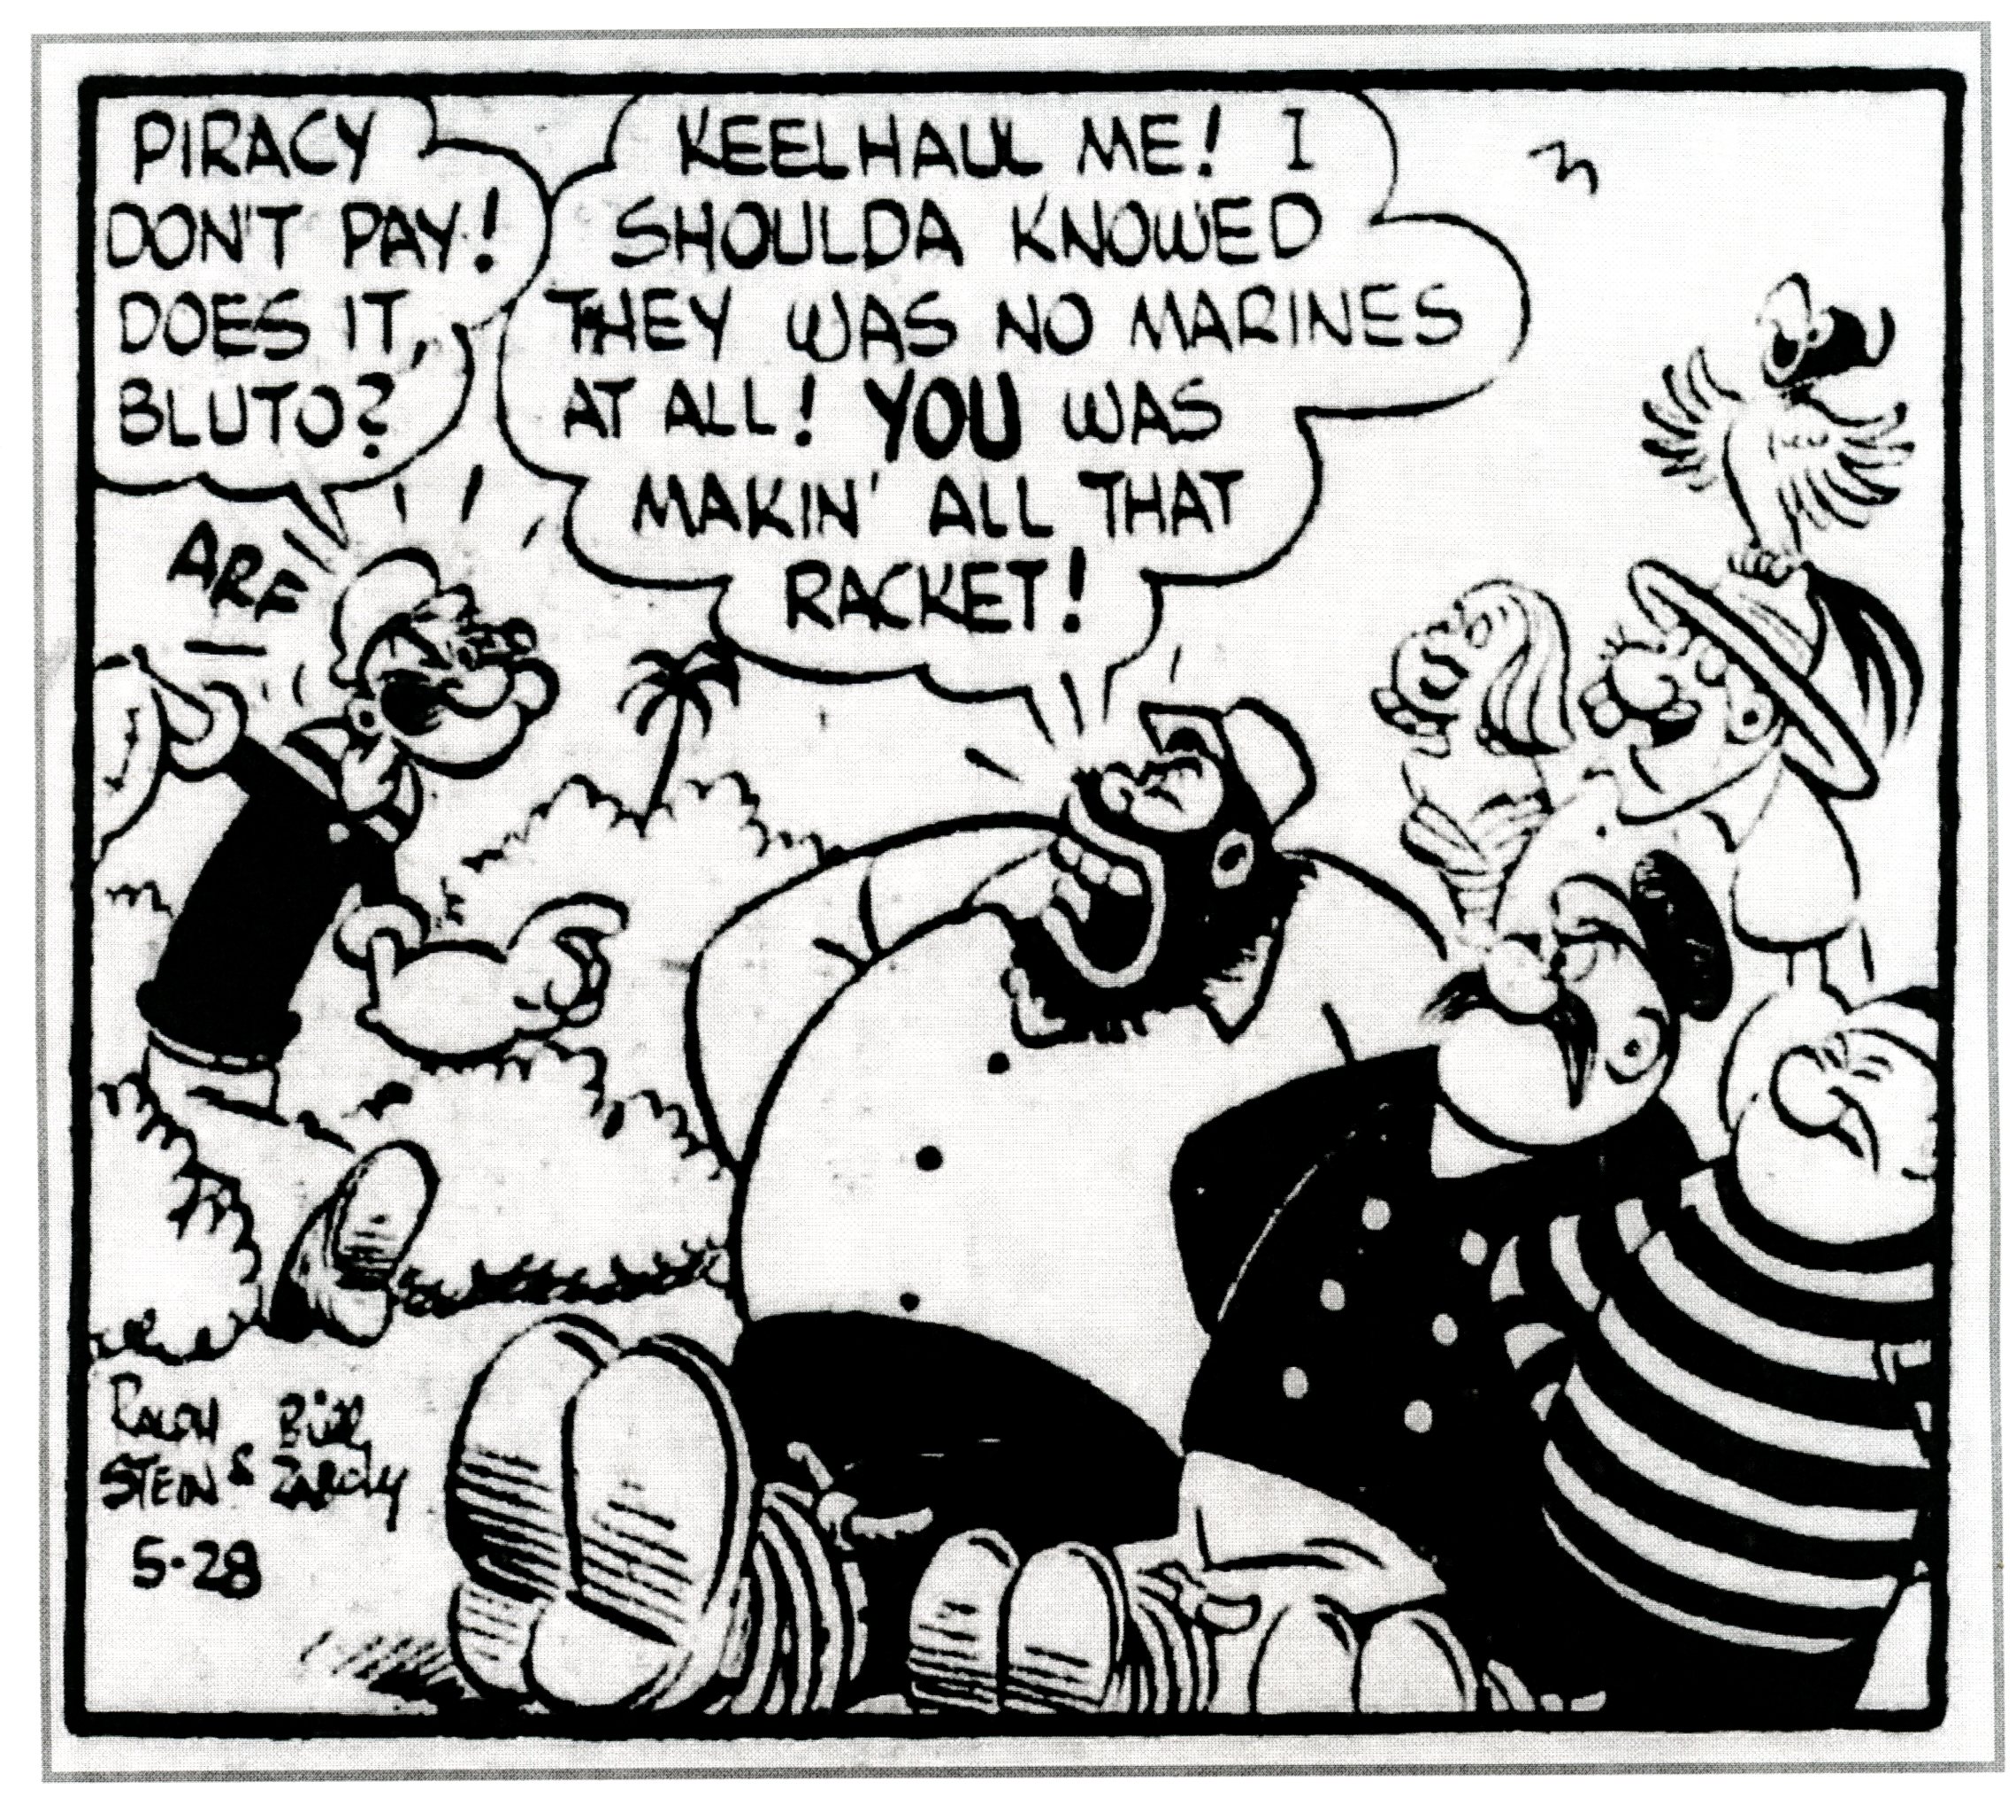 Writer Ralph Stein, along with cartoonist Bill Zaboly, put Bluto back in the daily comic strip. His capture took place on May 28, 1957.